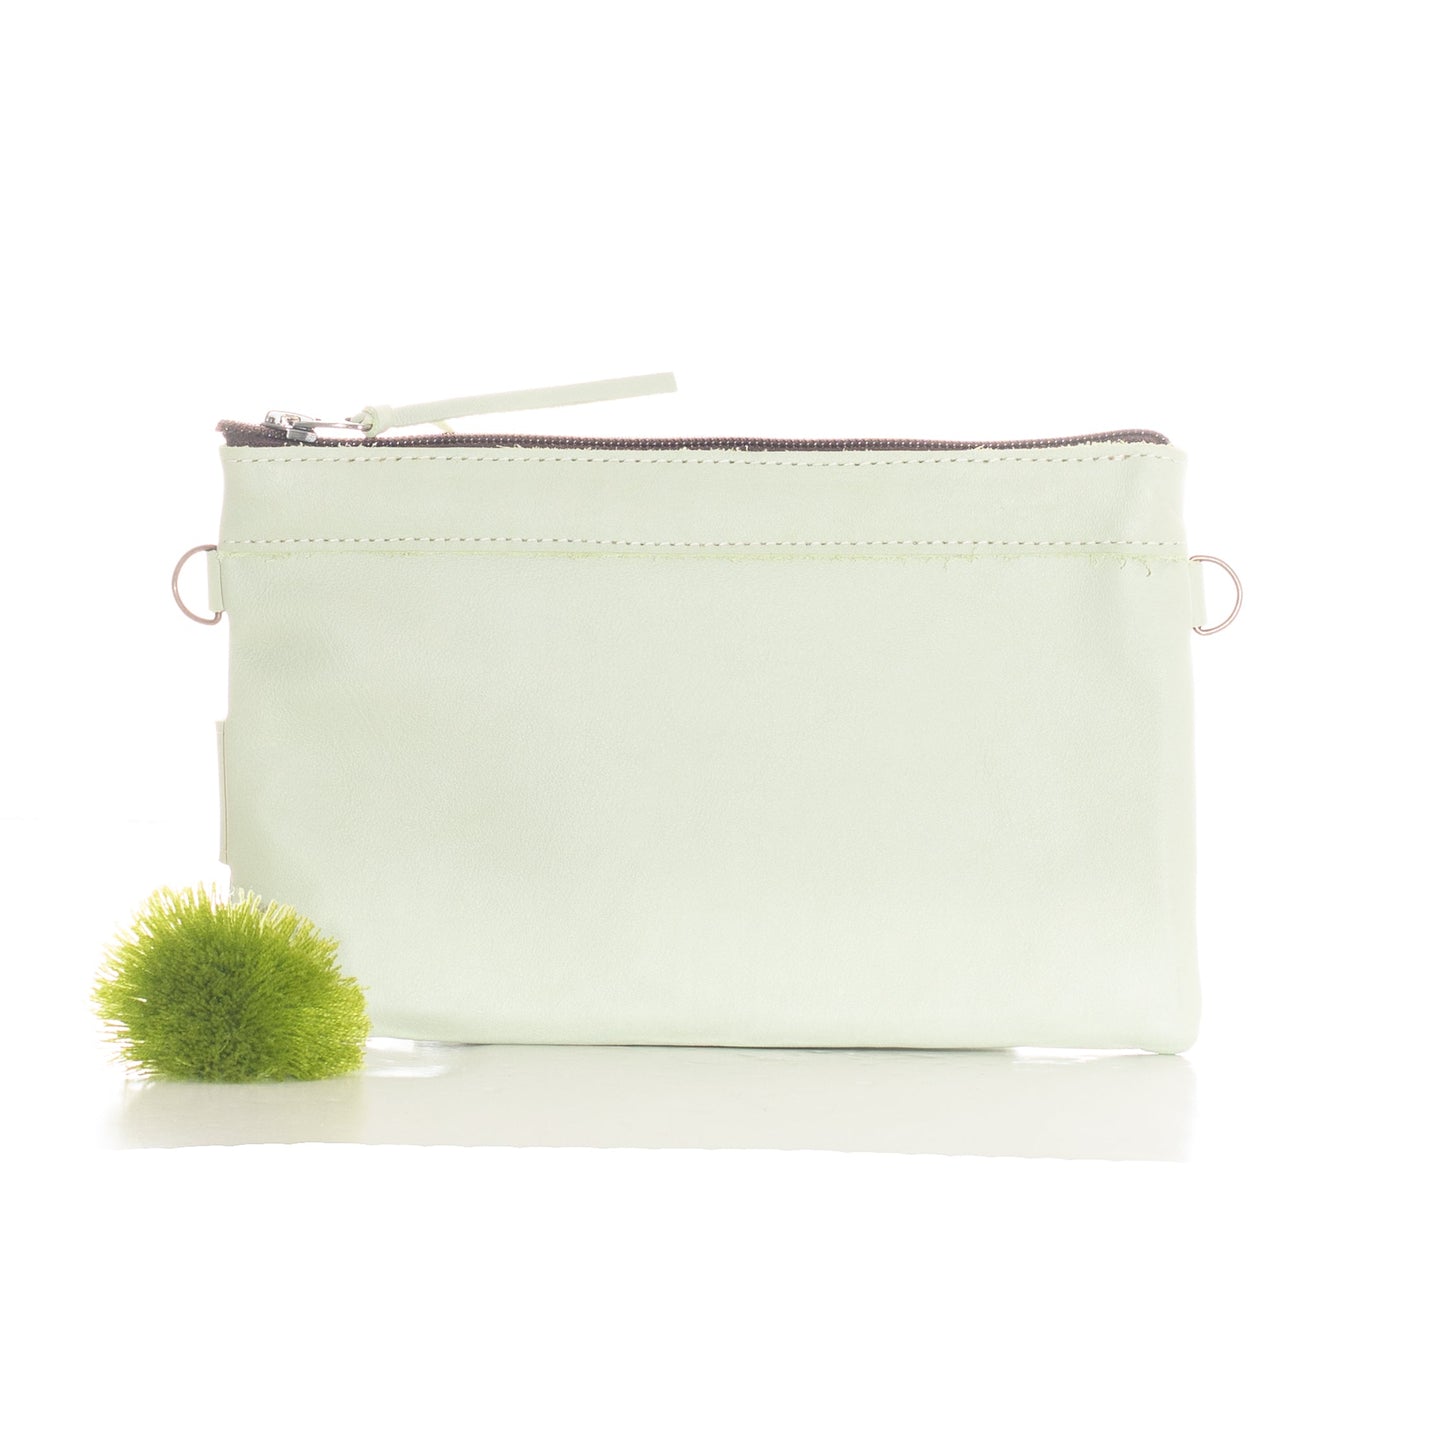 EVERYTHING CLUTCH WITH 3 D-RINGS - FULL LEATHER COLLECTION - PISTACHIO